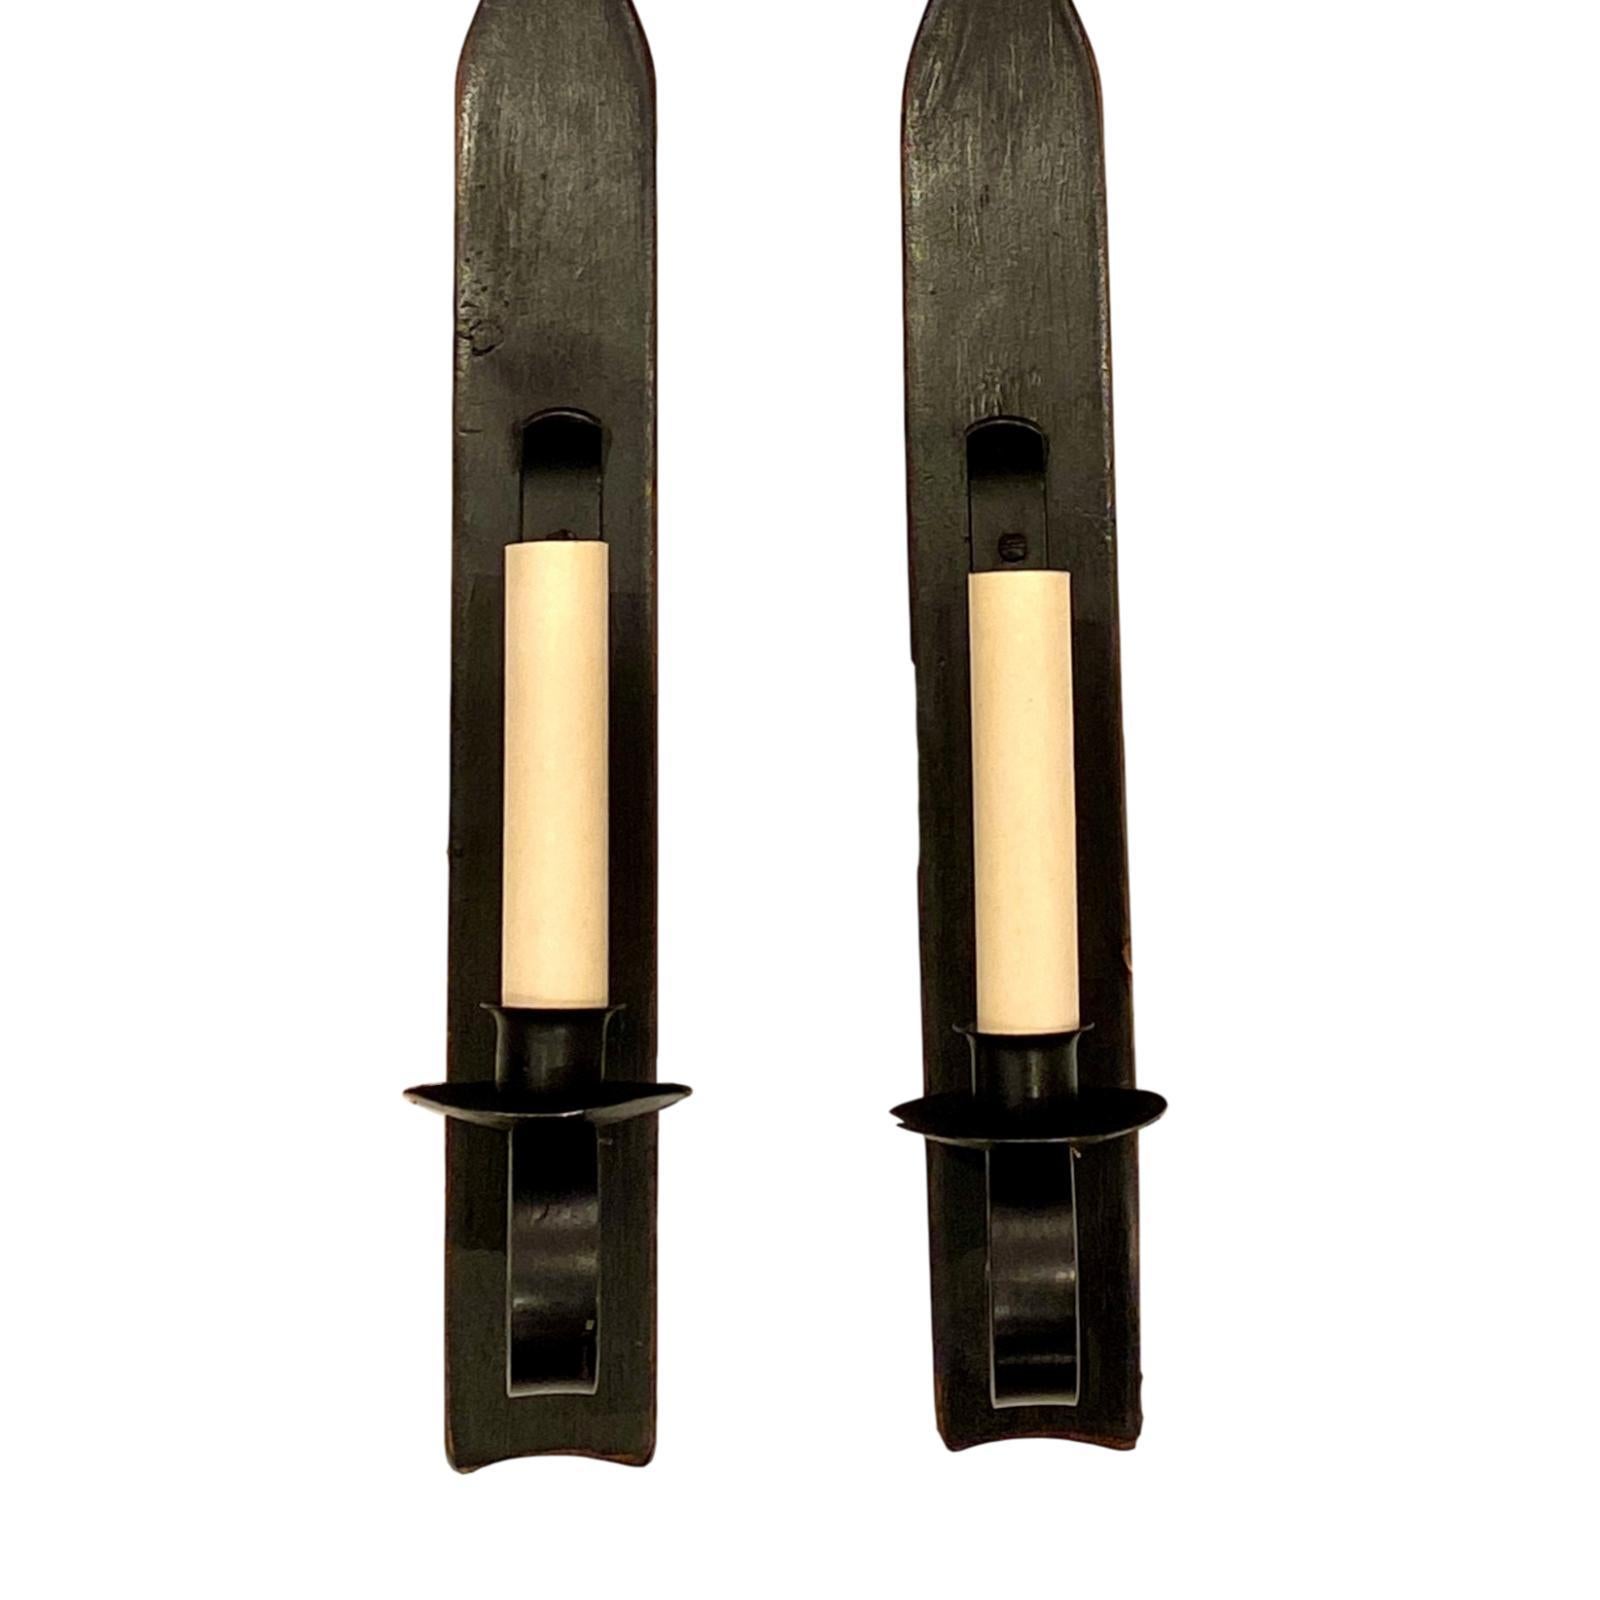 A pair of large circa 1940s English single-light carved and painted wood sconces with iron hardware.

Measurements:
Height 27?
Width 4?
Depth 4?